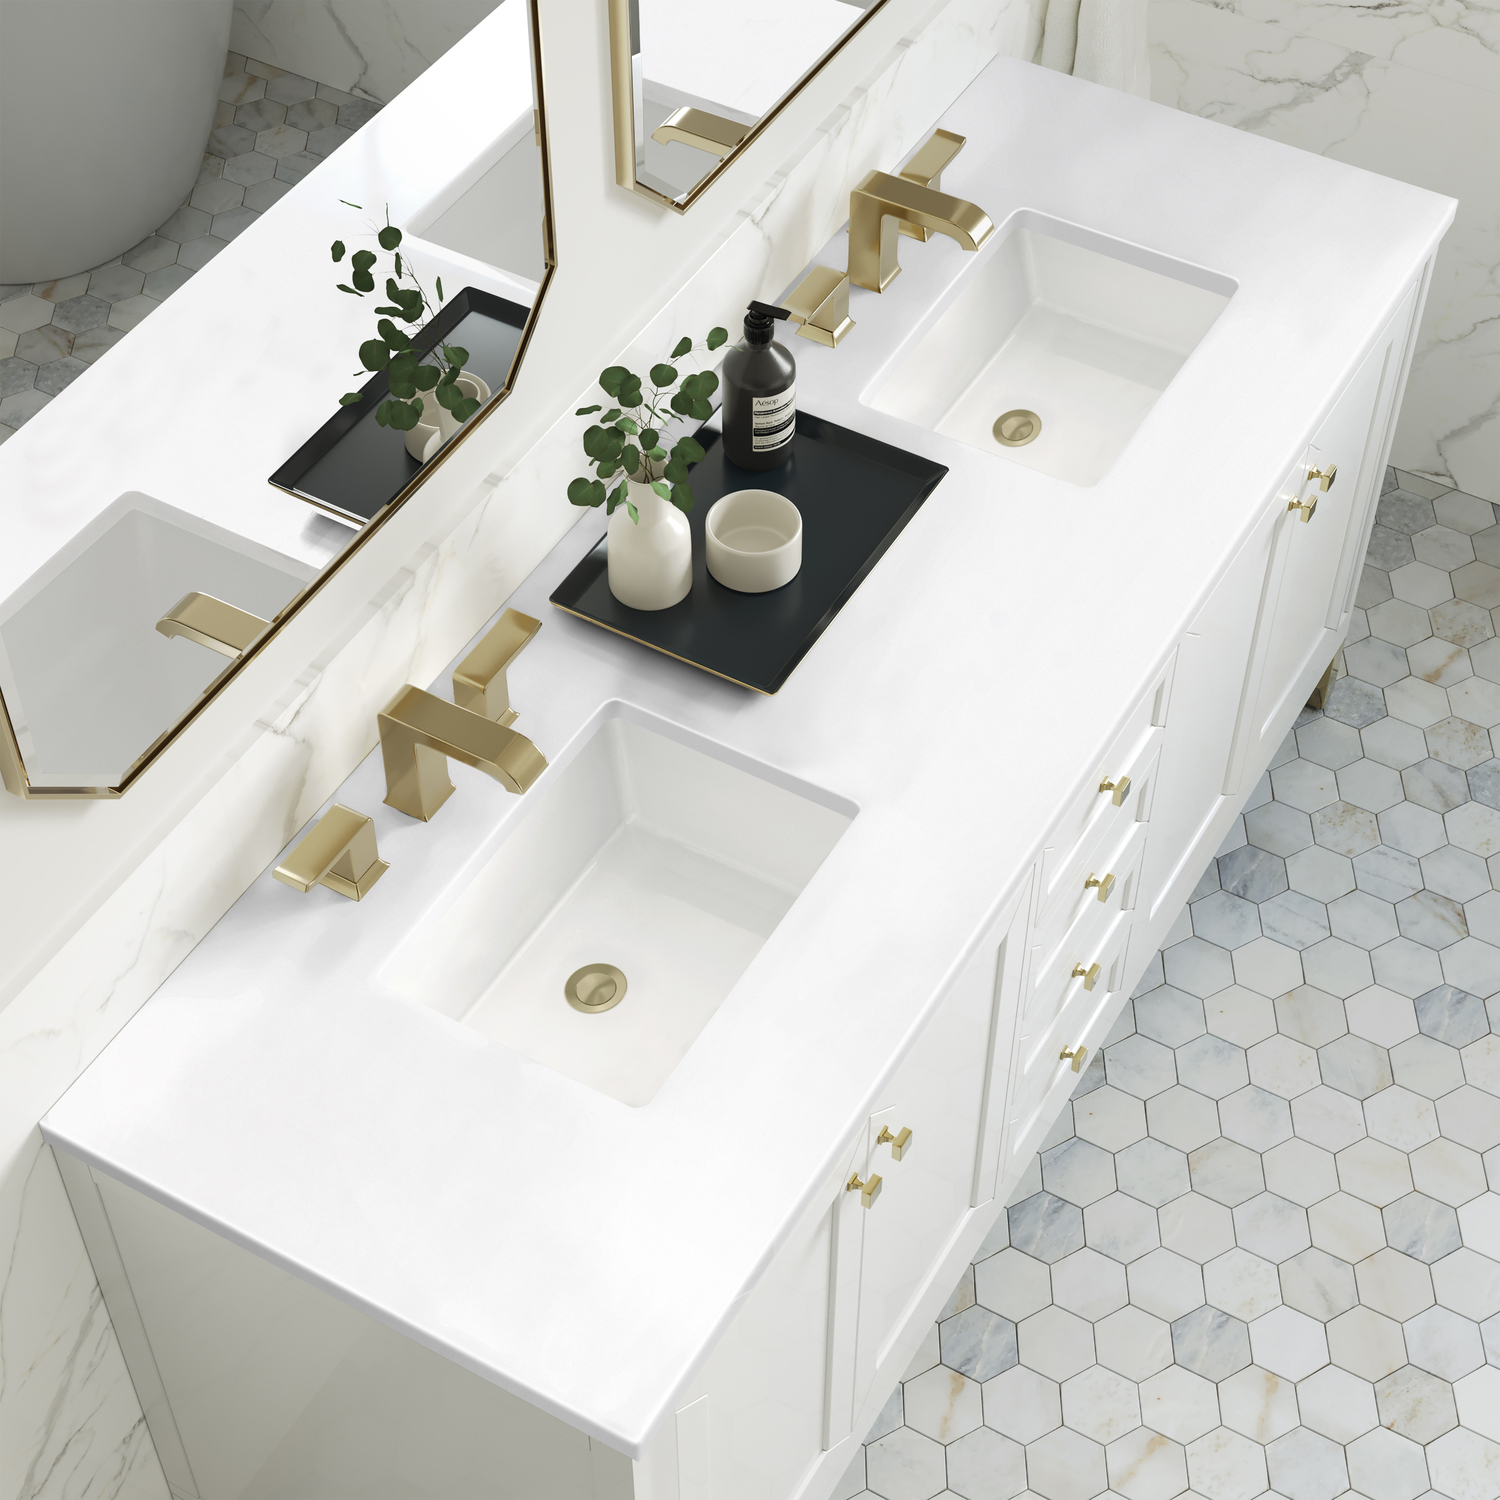 bathroom counter with sink James Martin Vanity Glossy White Modern Farmhouse, Transitional